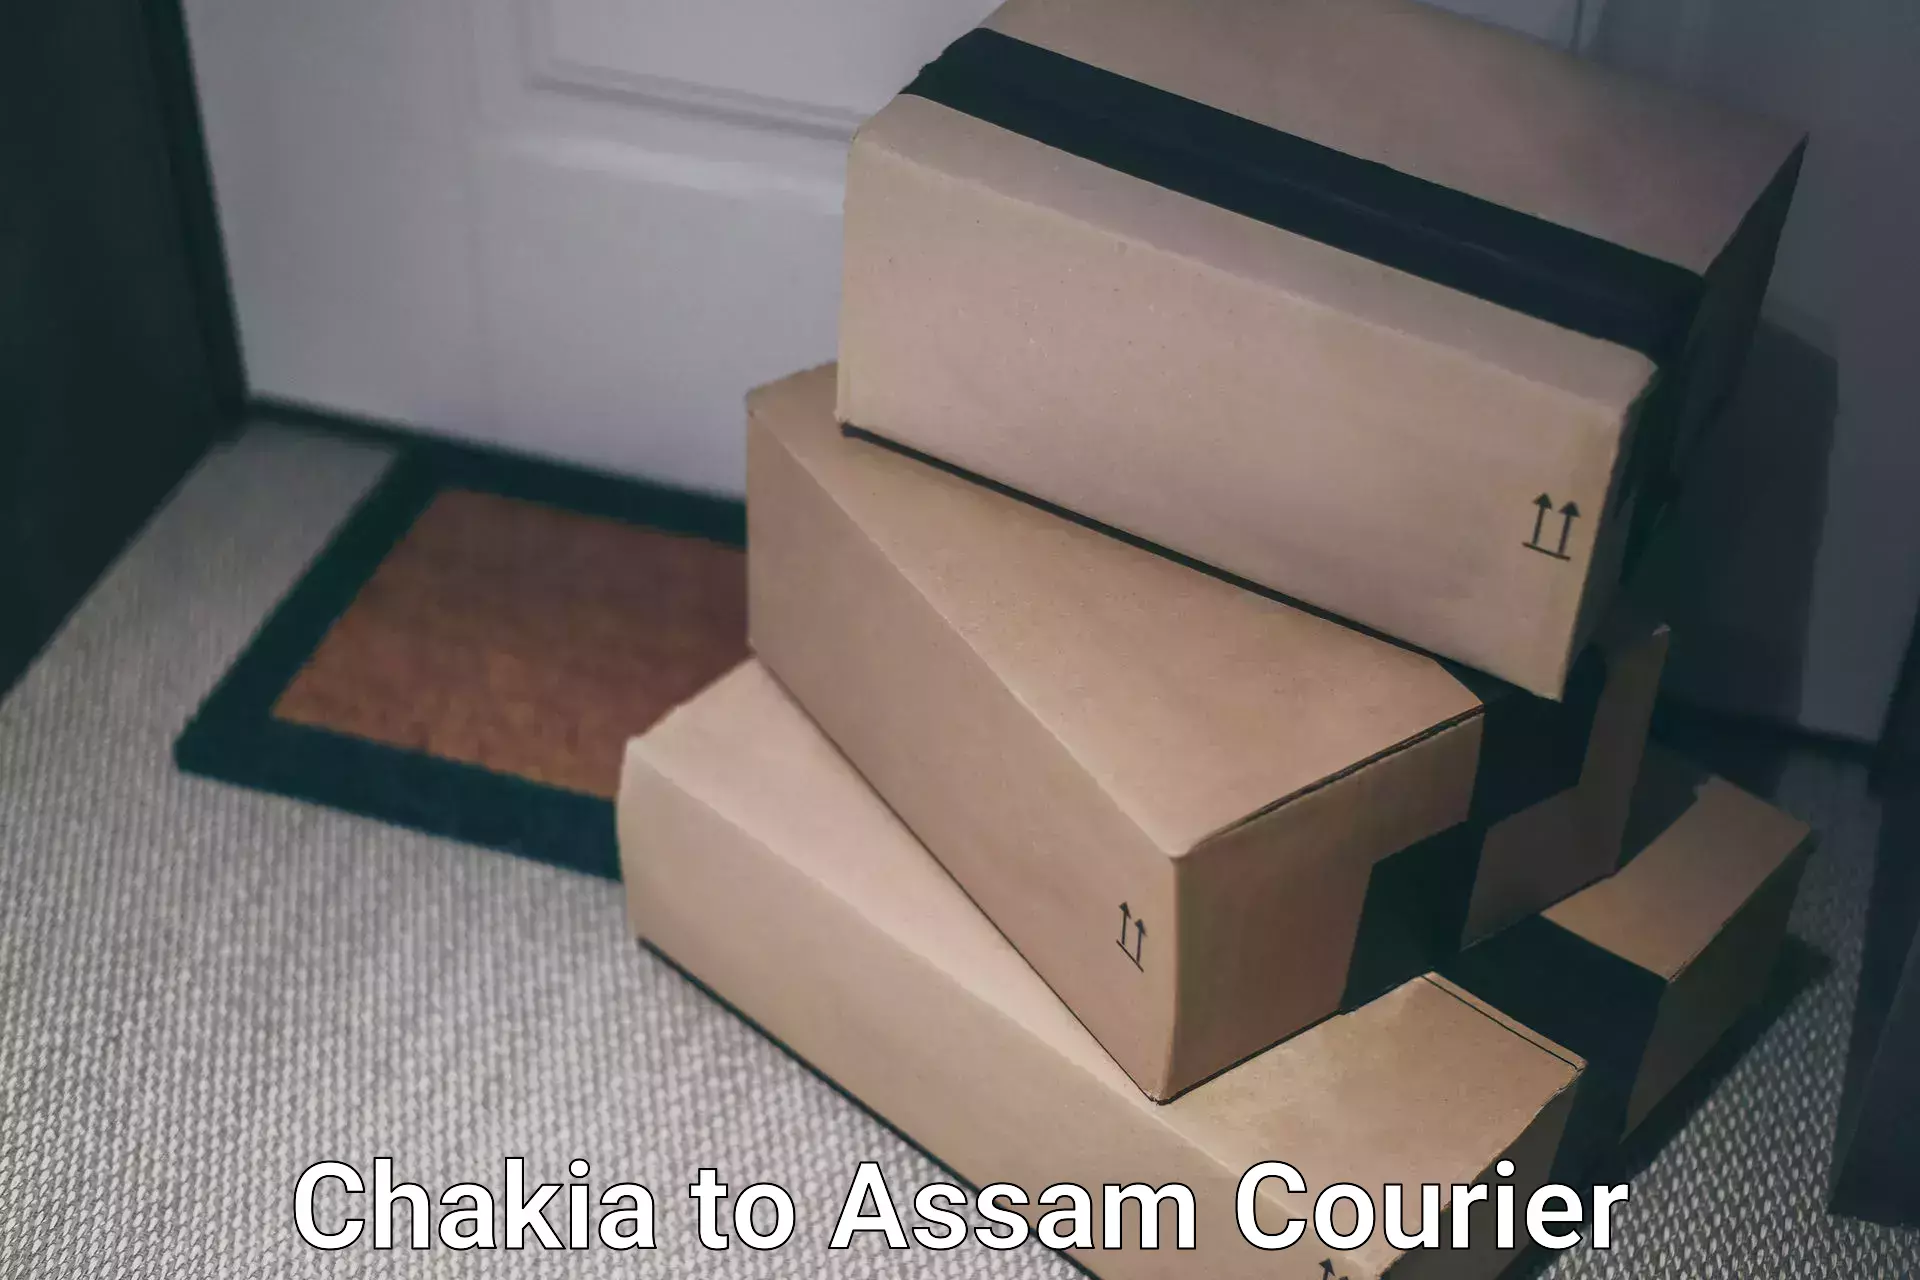 Nationwide parcel services Chakia to Dibrugarh University